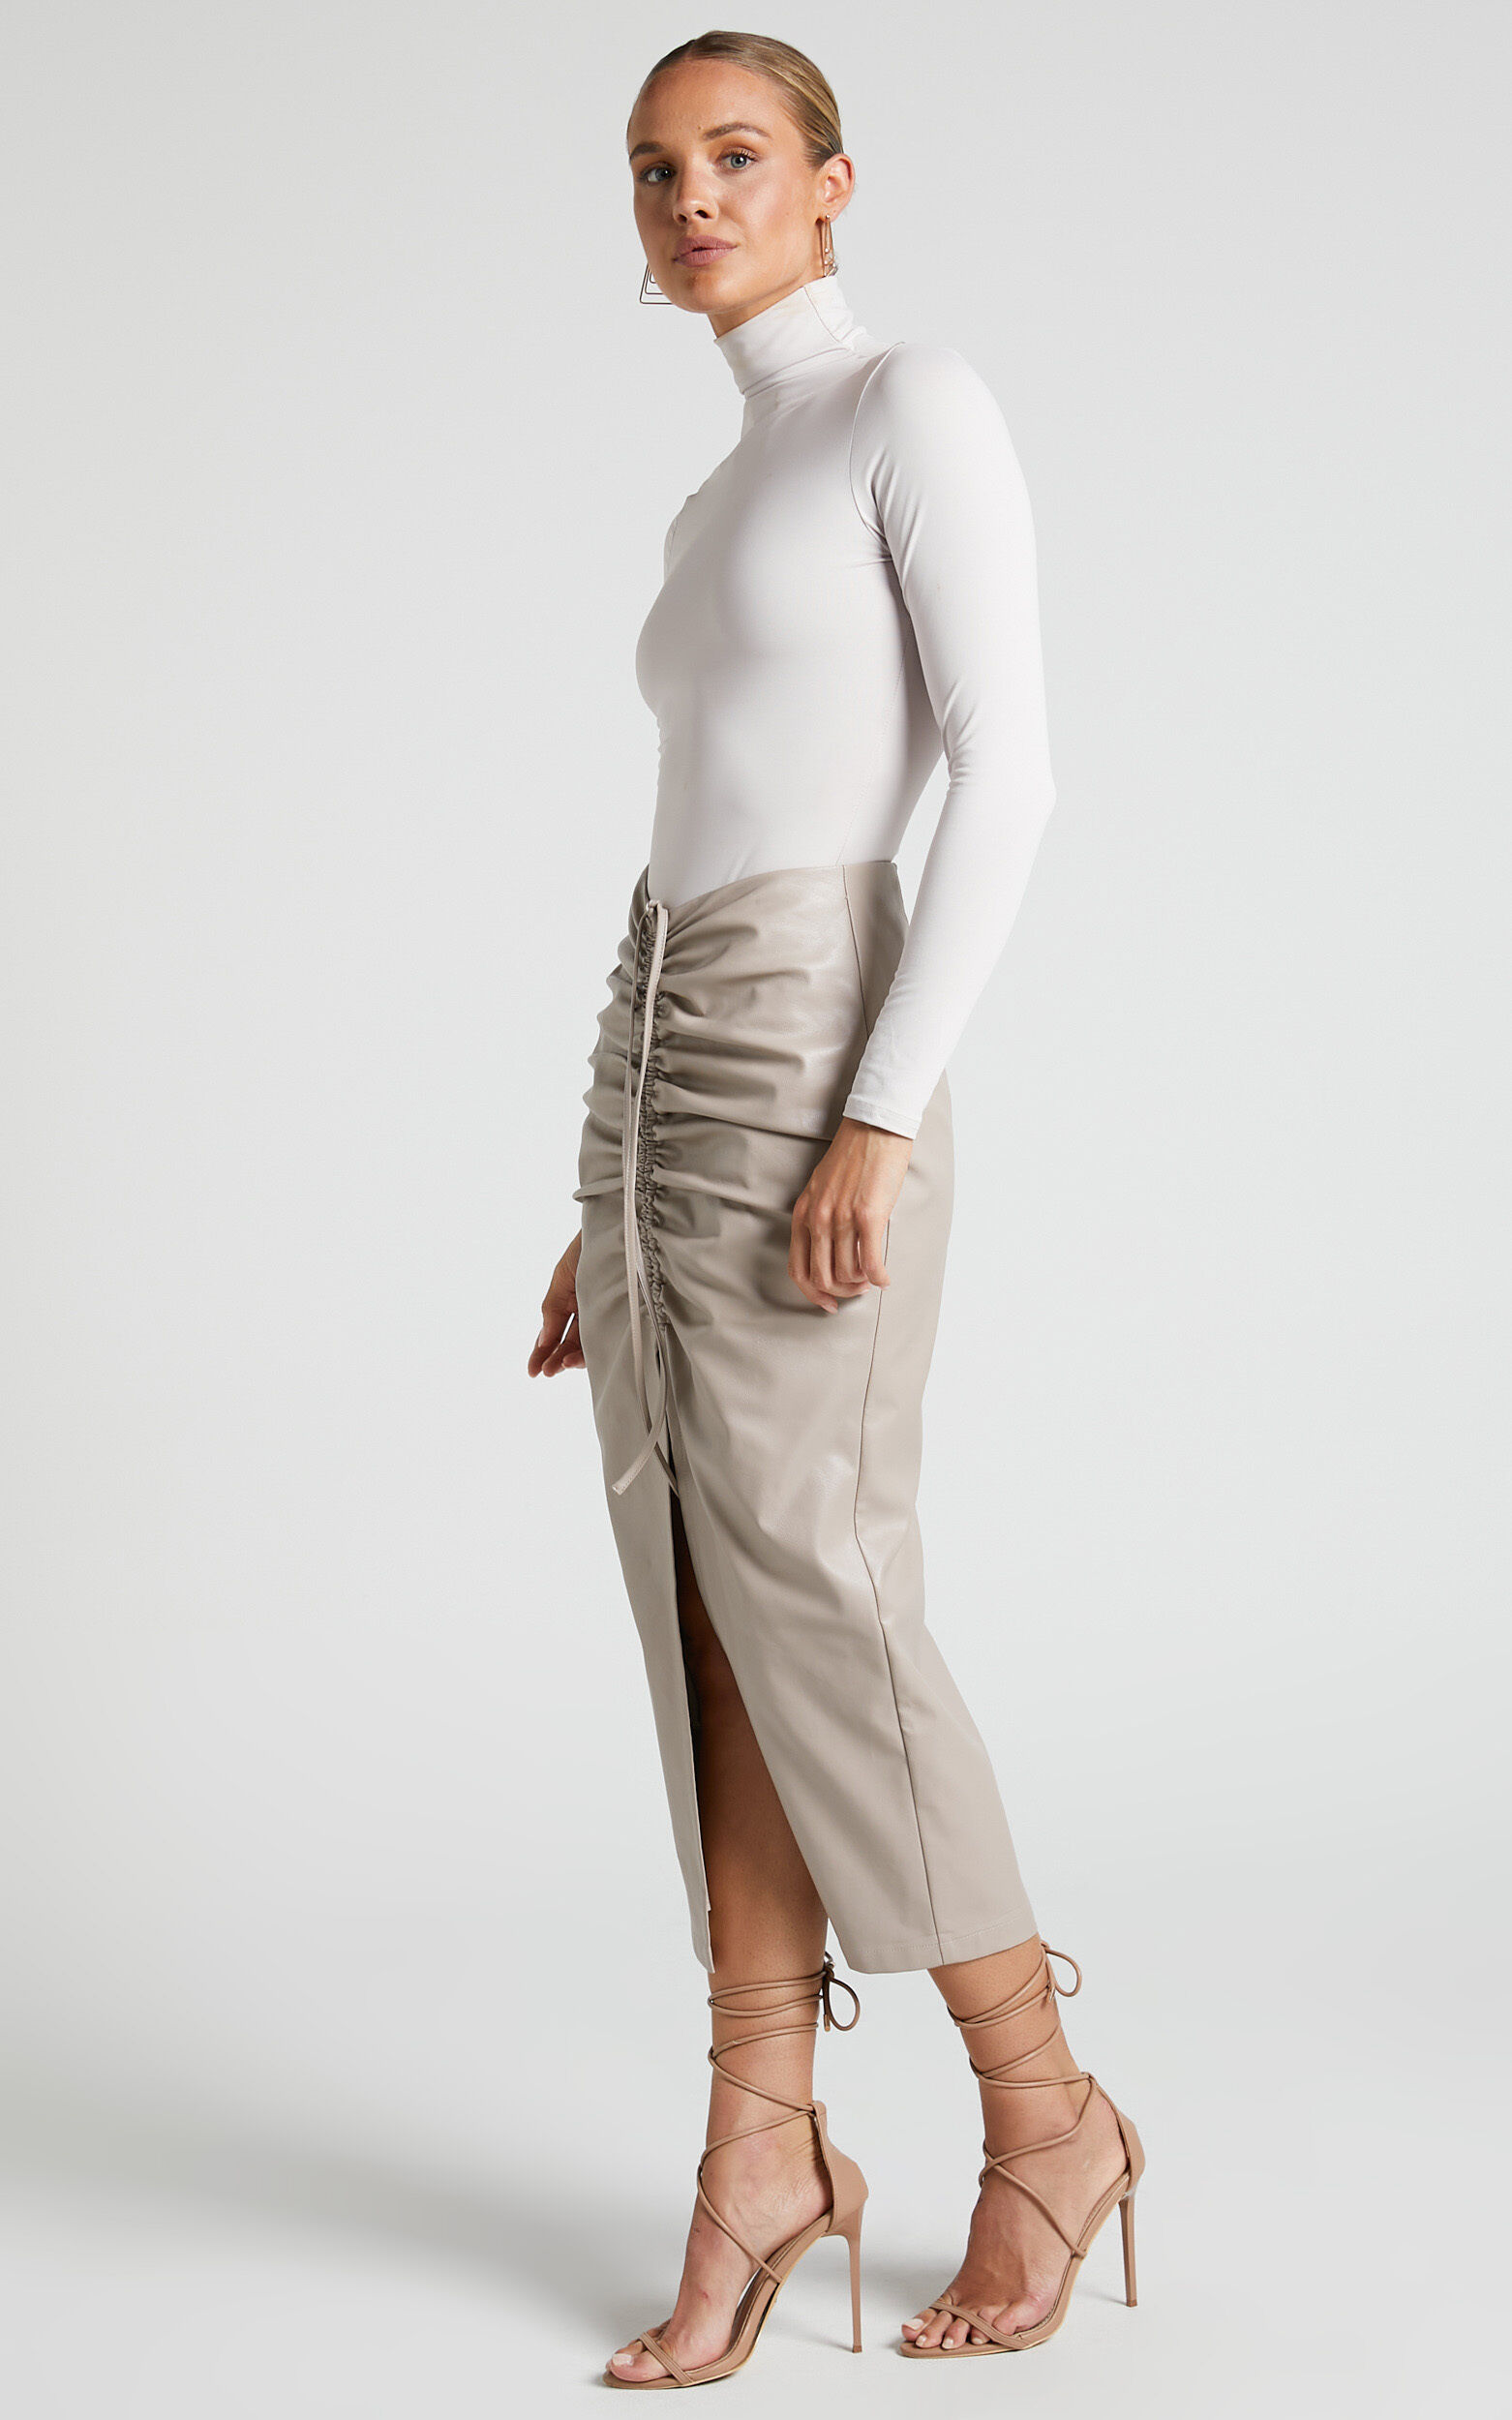 Laurenna Midi Skirt - Faux Leather Ruched Front Split Skirt in Beige